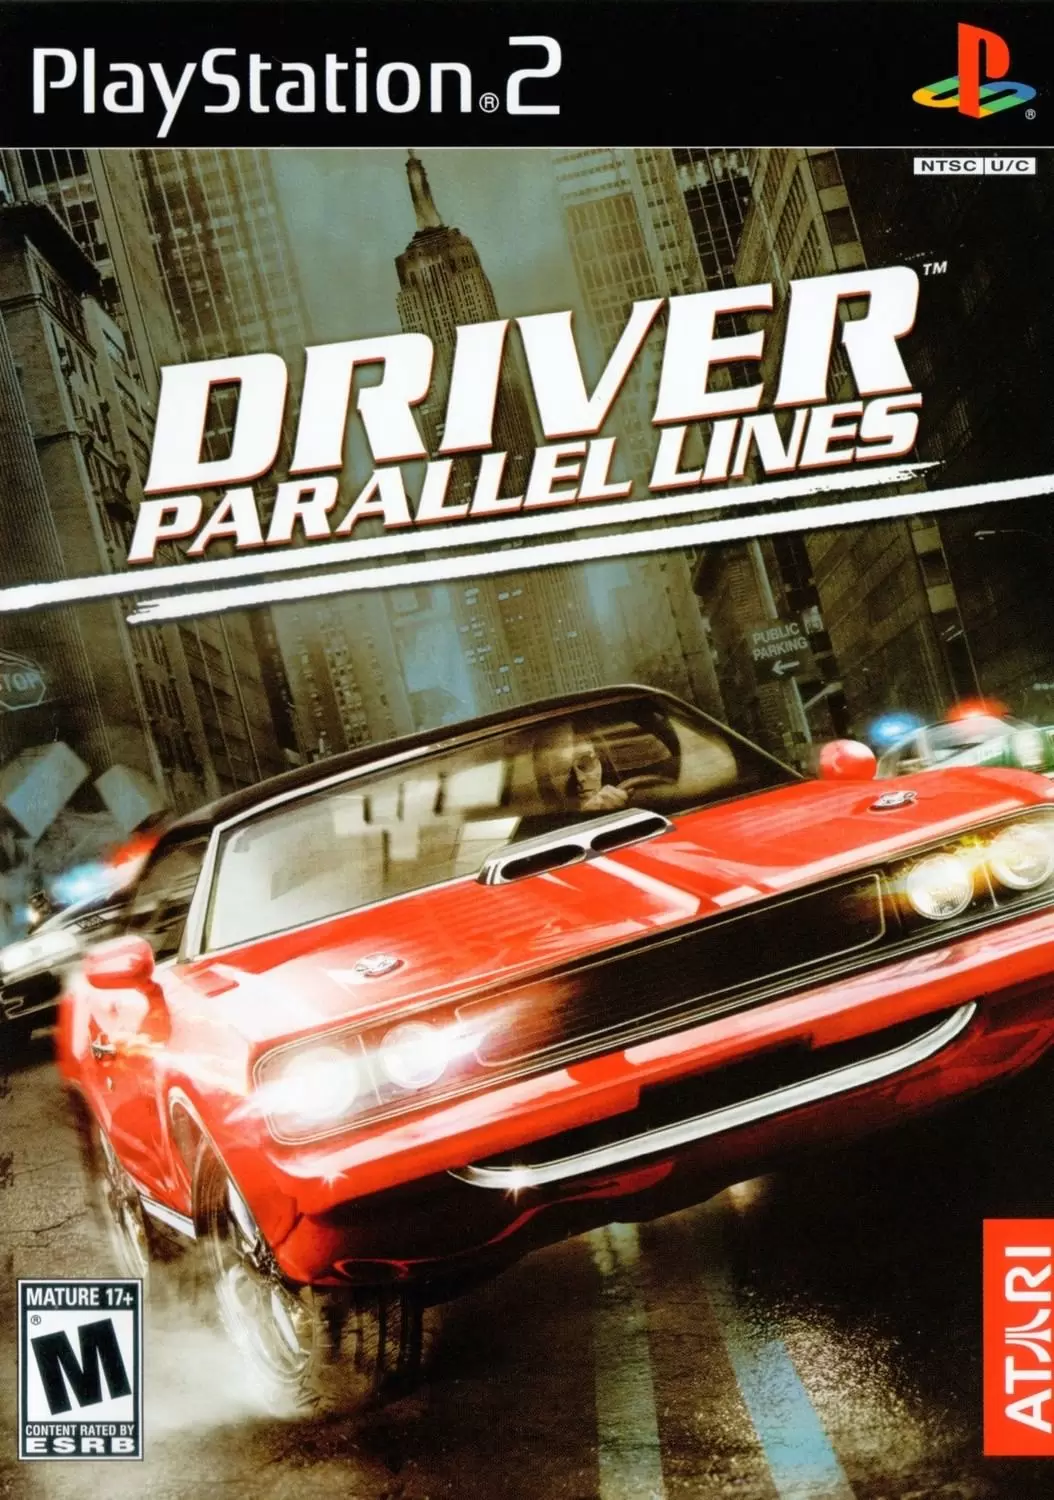 PS2 Games - Driver: Parallel Lines